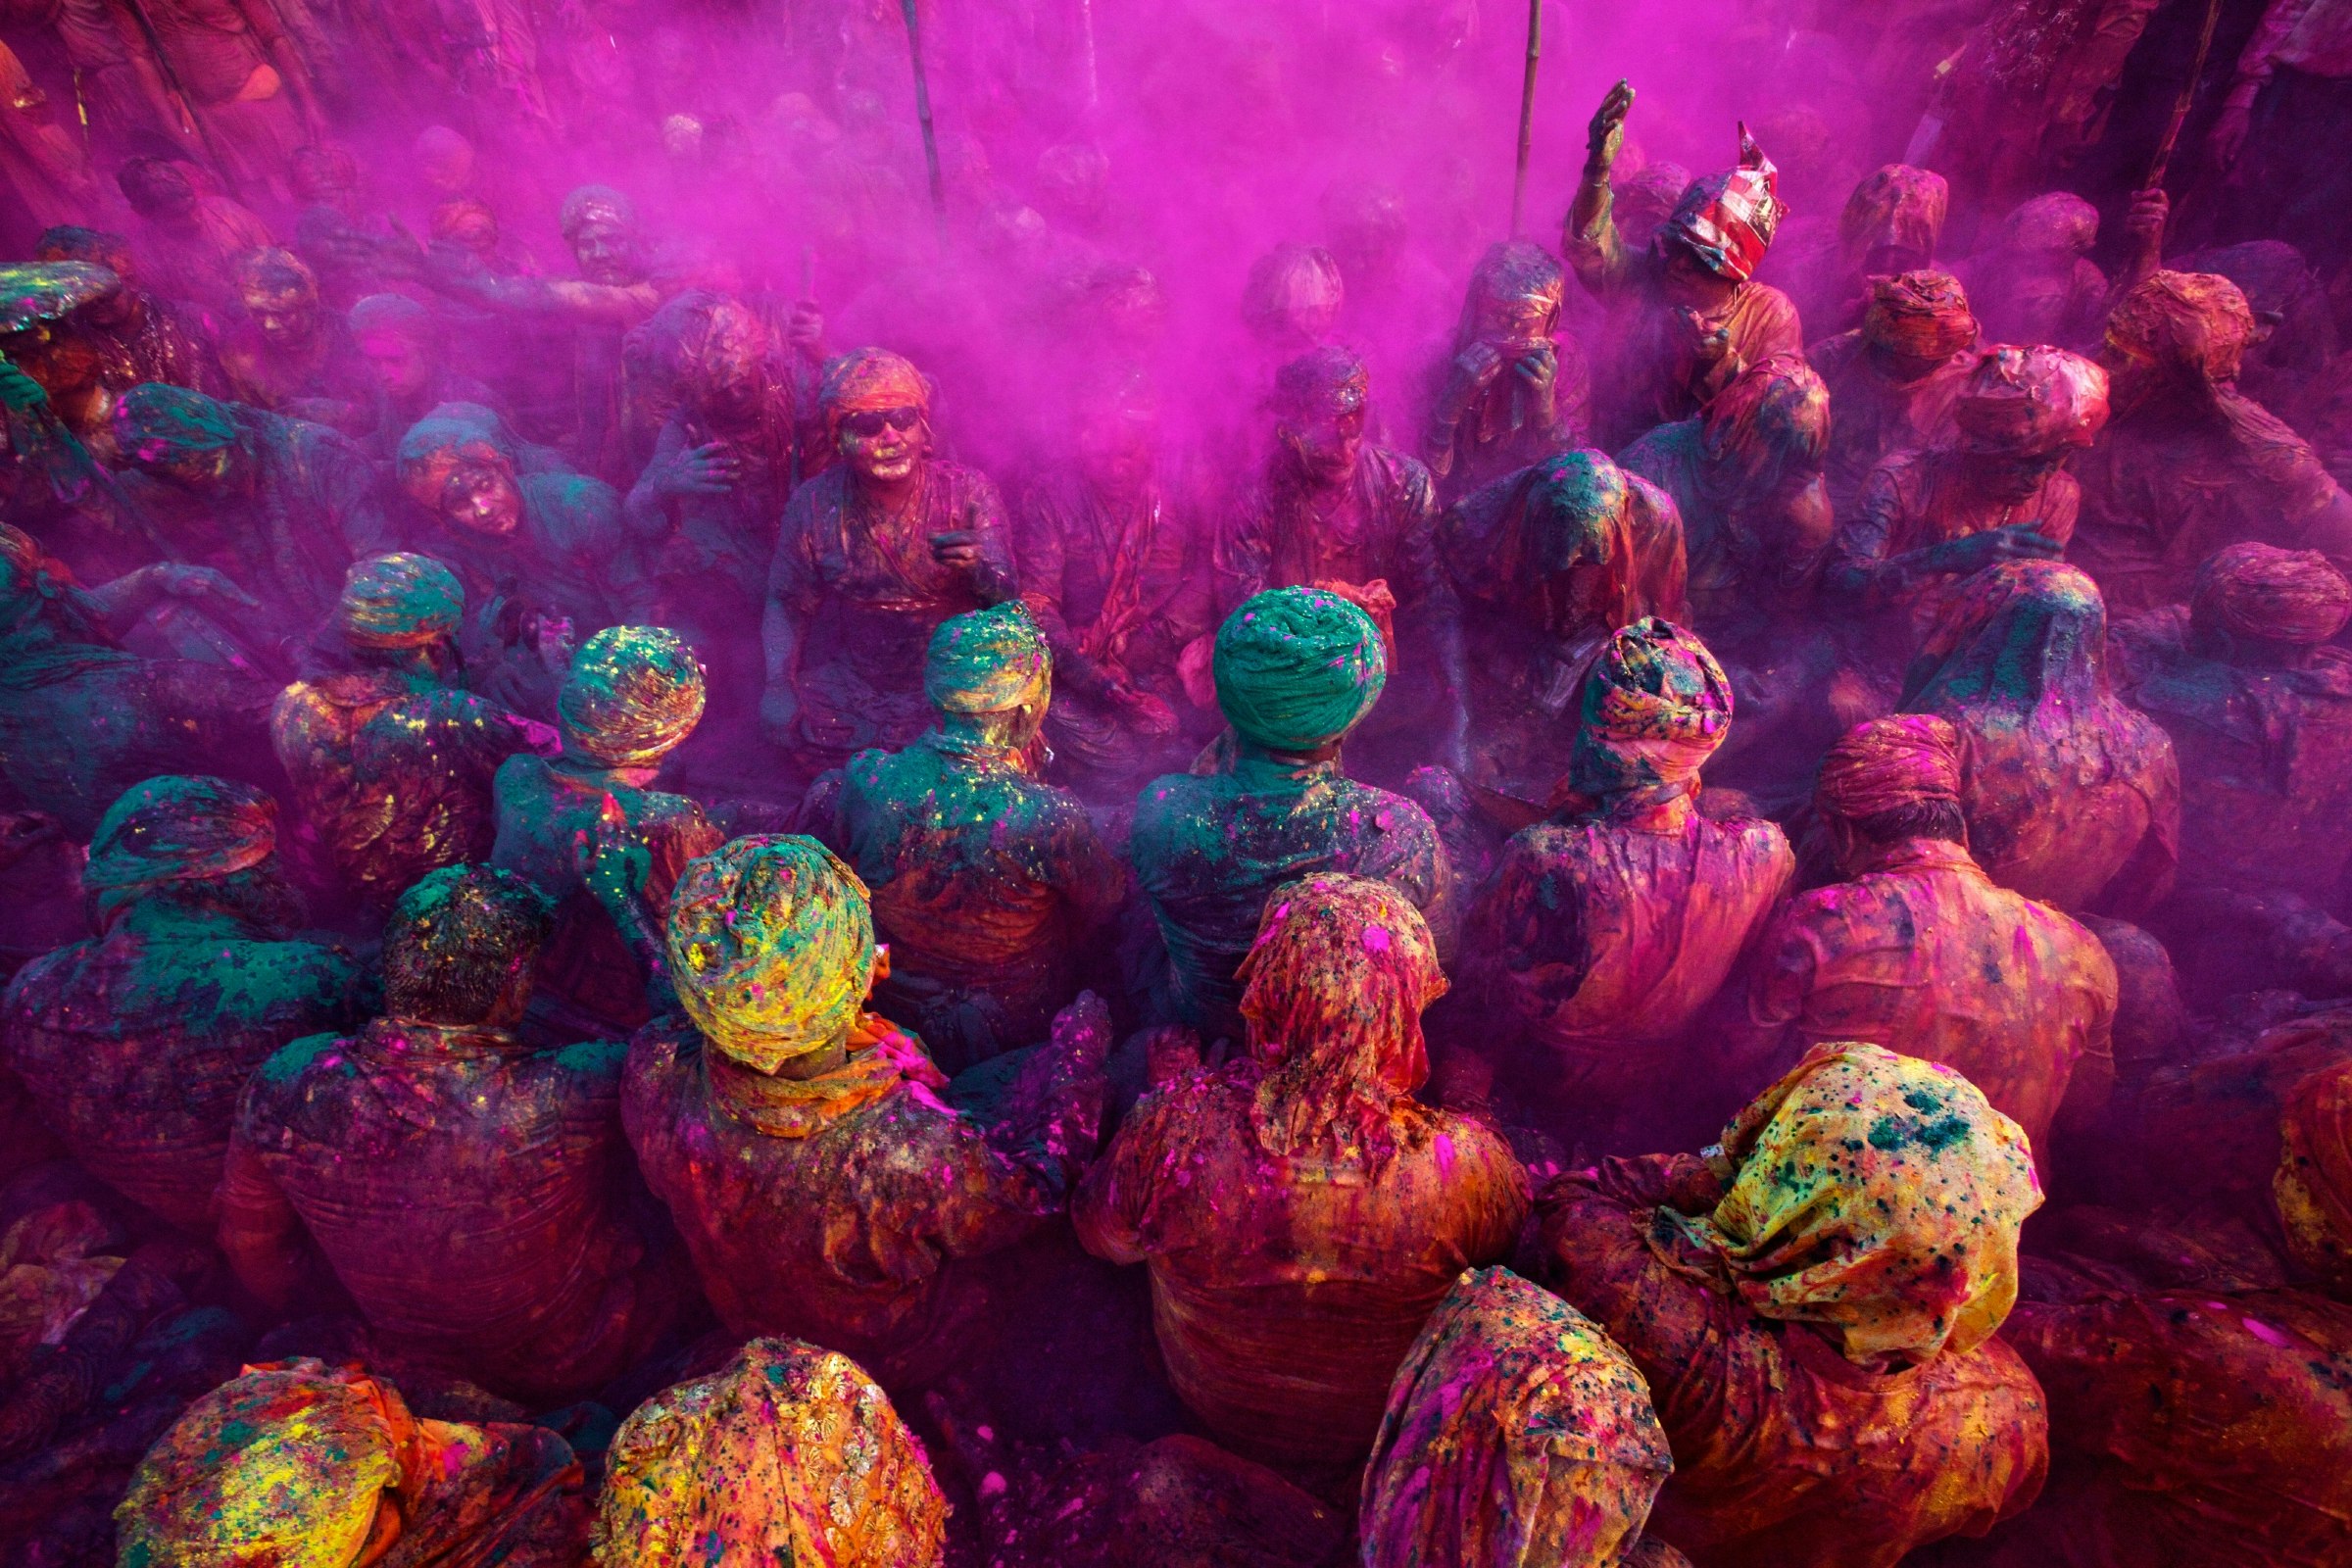 A large group of people, whose clothes are splattered with every colour of the rainbow, sit on the floor cross legged as part of Holi festivities in India.